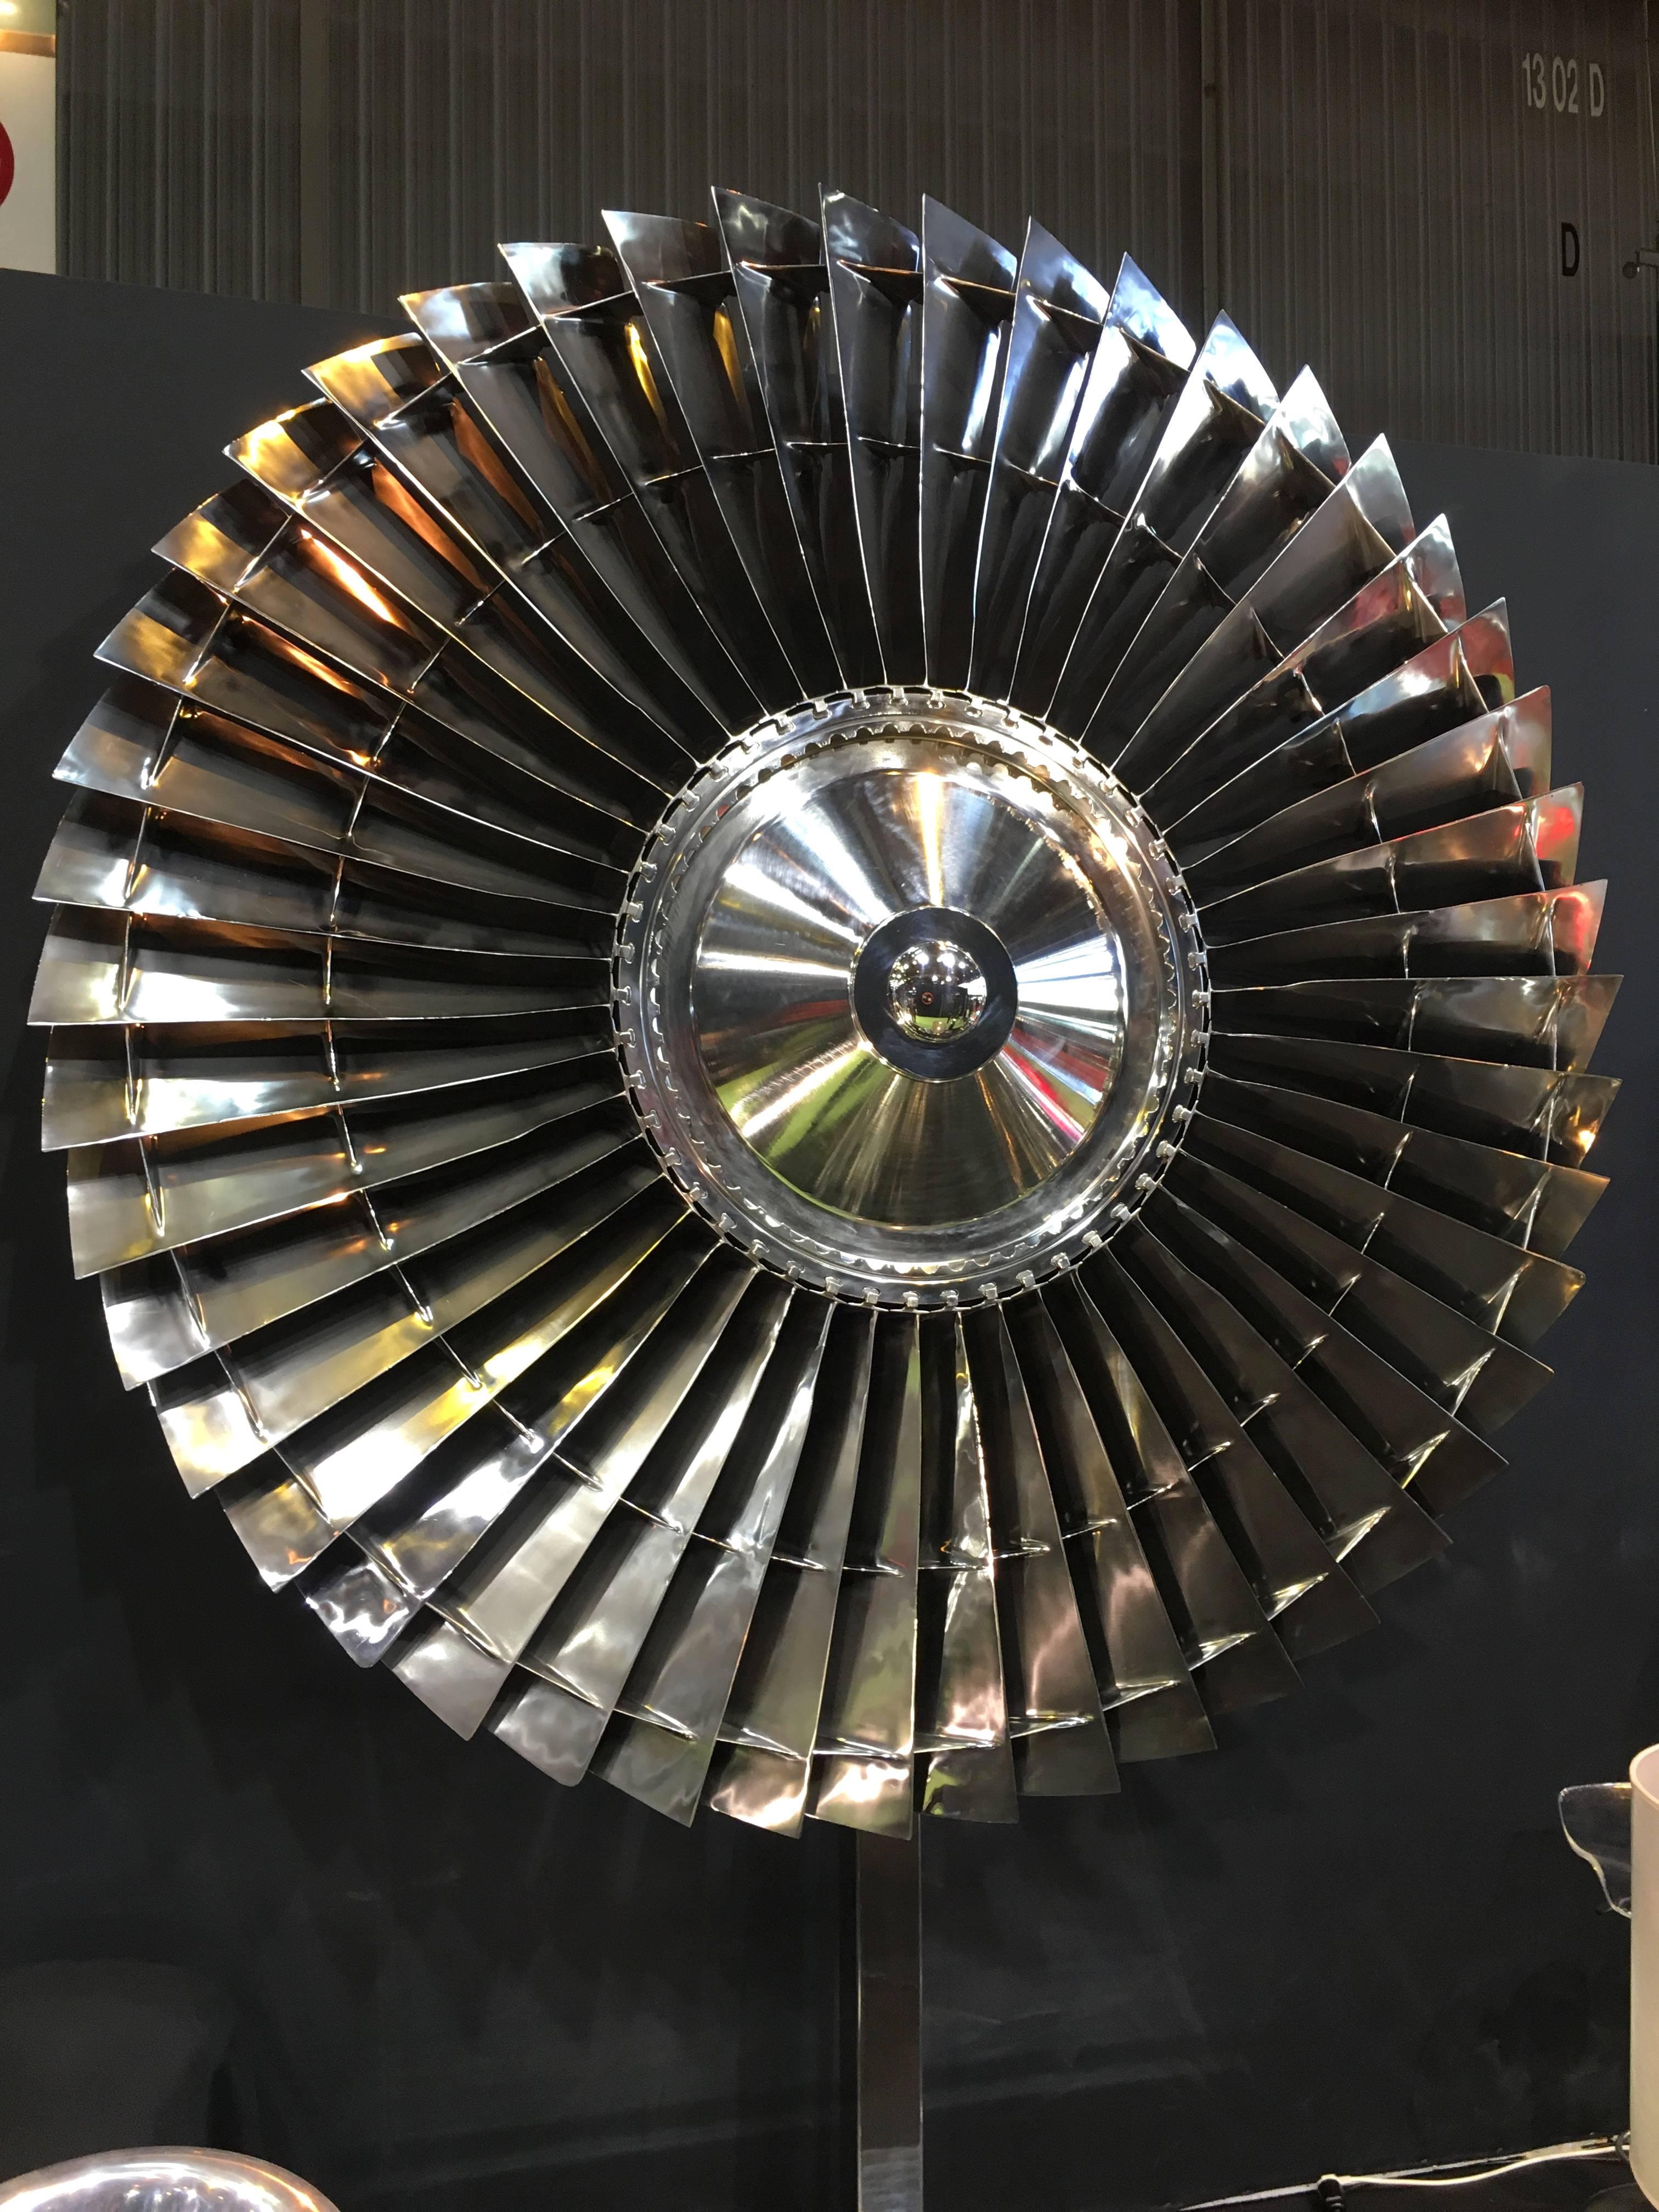 Mobilier Aeronautique, aircraft, aero-design
This impressive sculptural piece is an authentic, hand-polished fan blade from a Boeing 747 aircraft, circa 1970. The Pratt & Whitney JT9D engine was the first high-bypass-ratio jet engine to power a